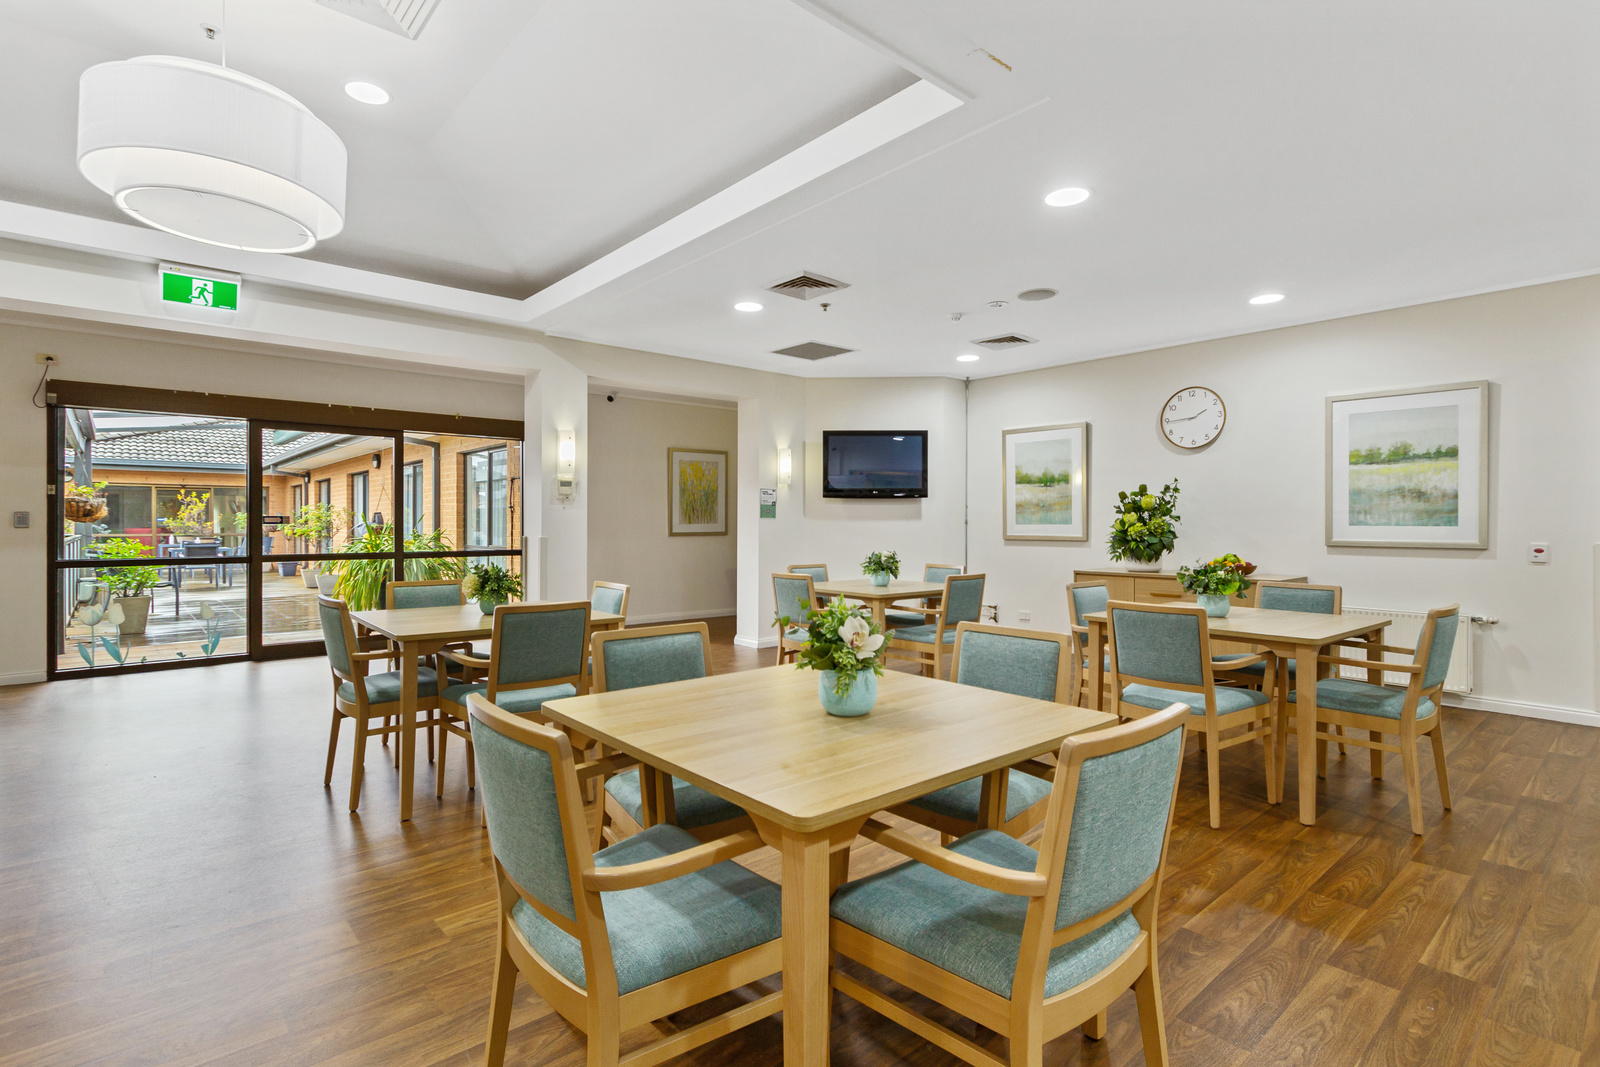 John R Hannah Aged Care Mulgrave dining area with multiple tables